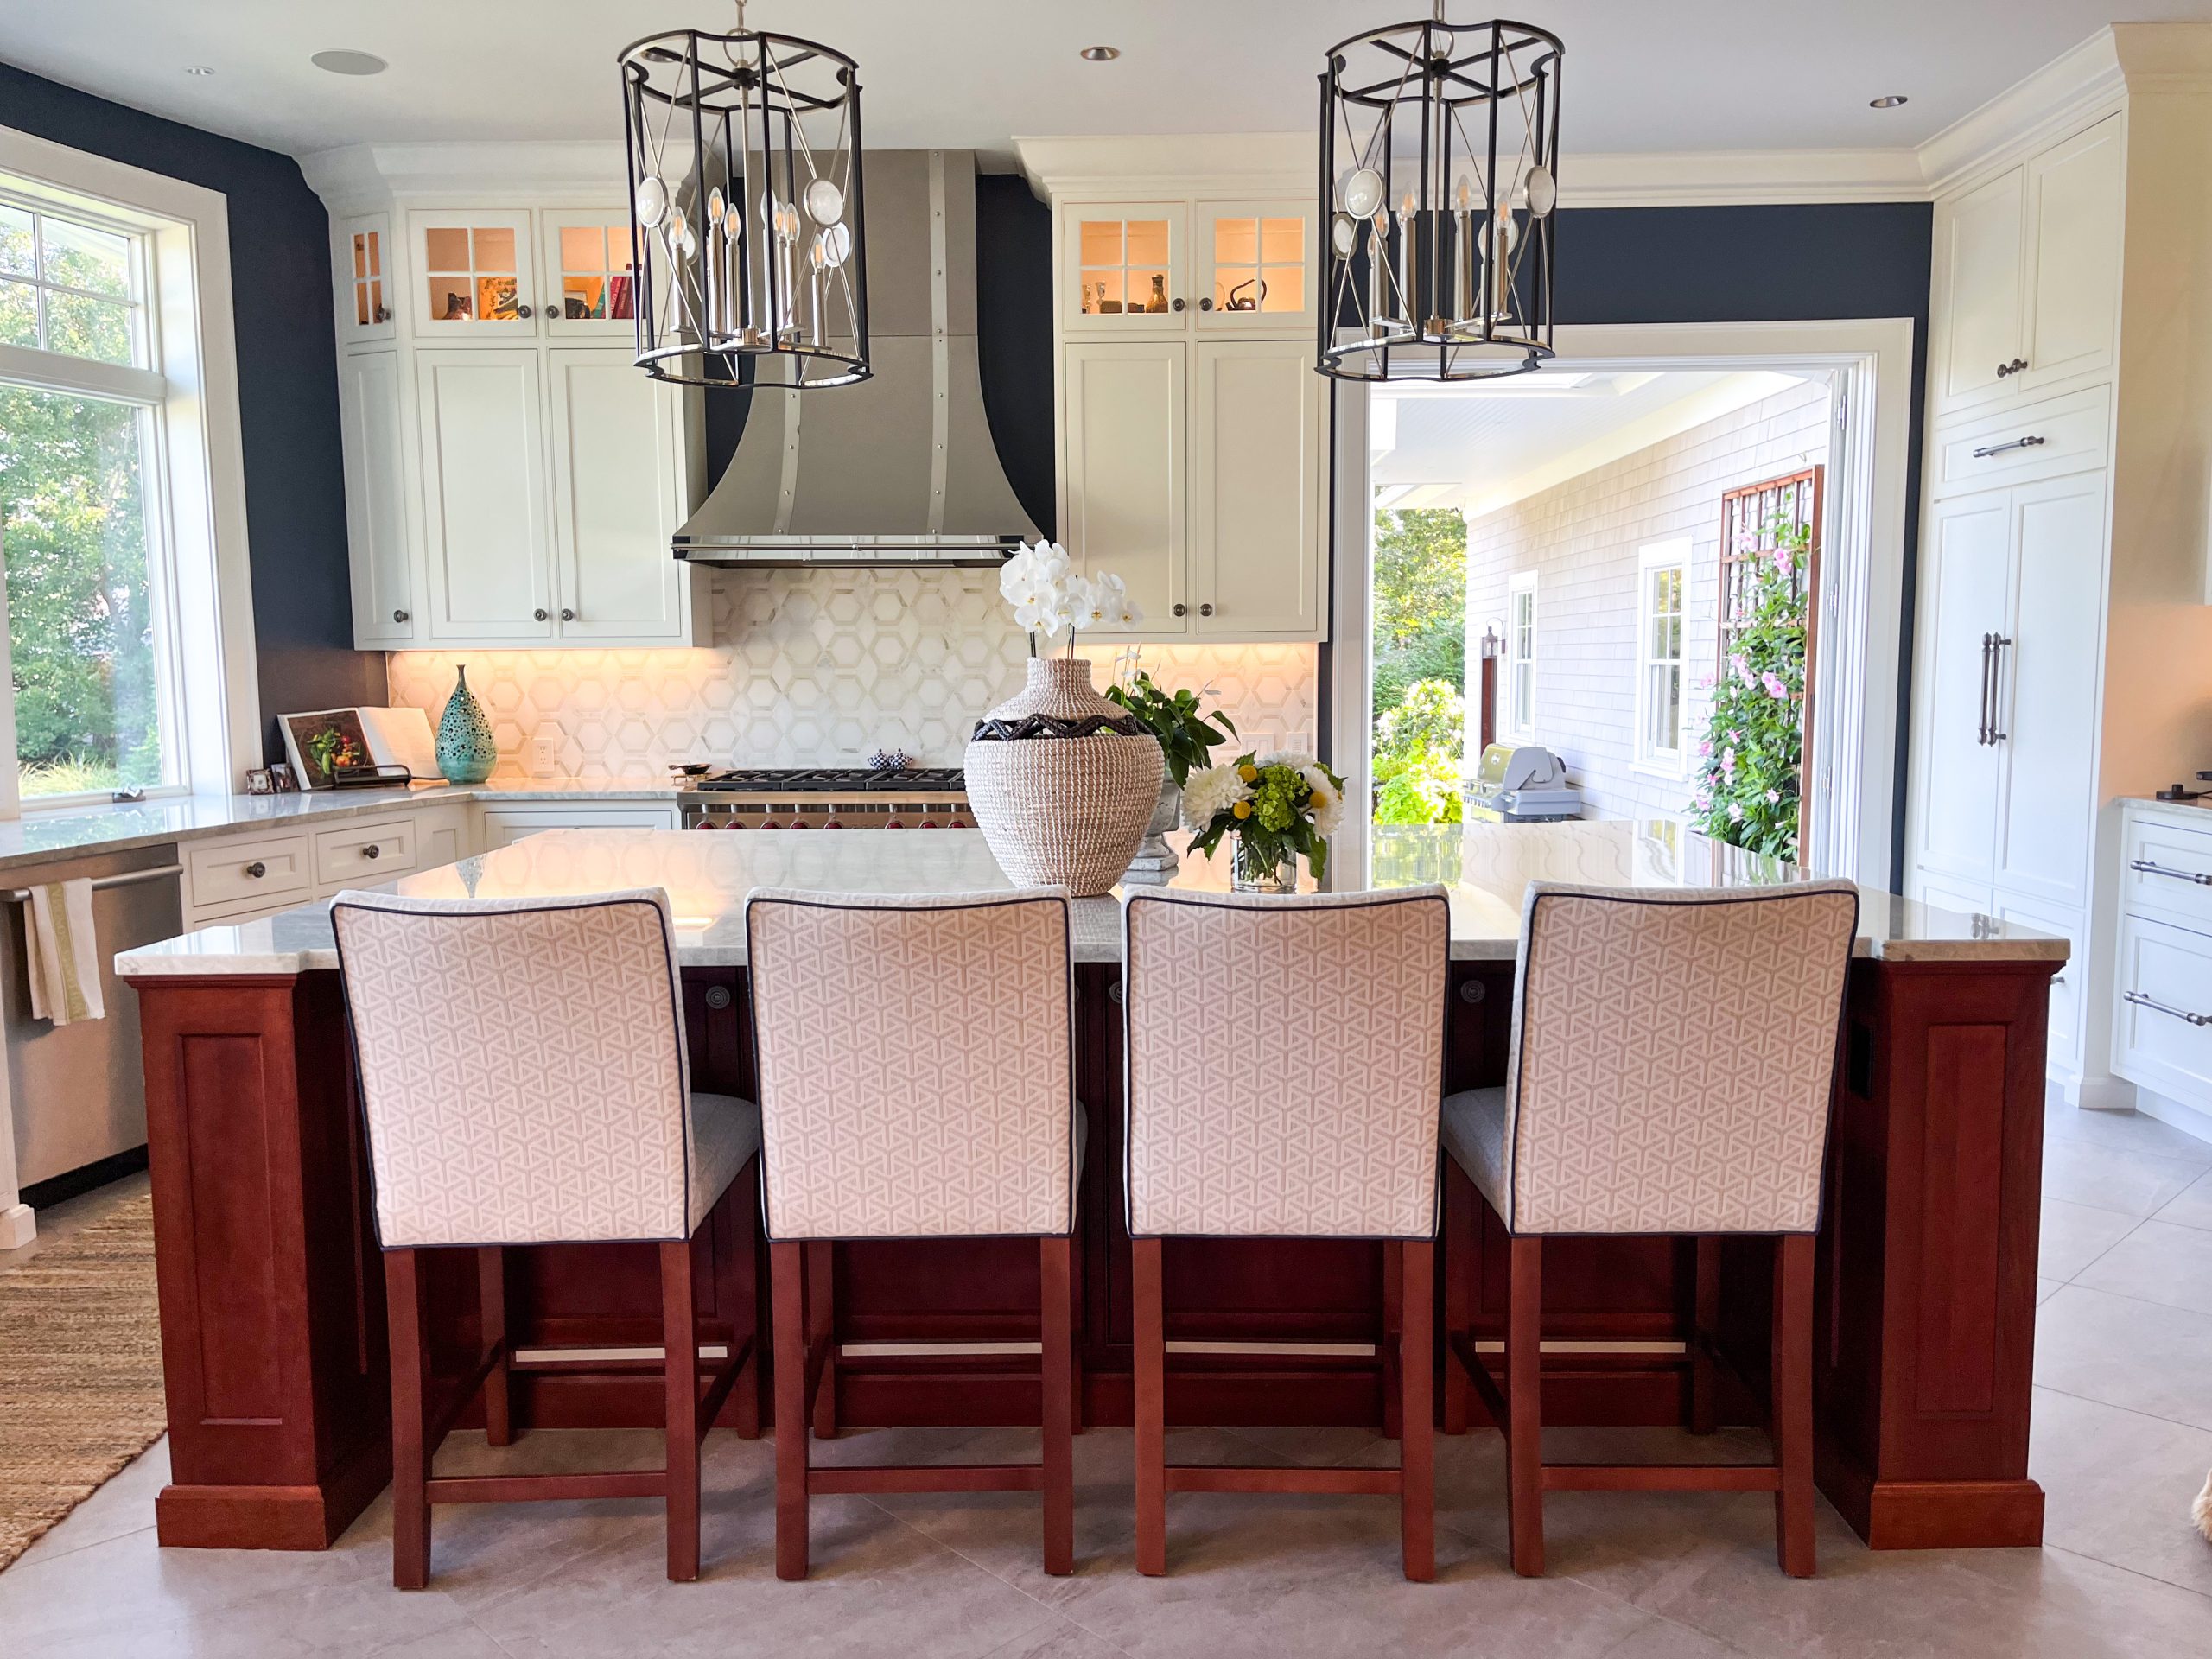 A bright kitchen with a cherry wood island and white upholstered chairs.